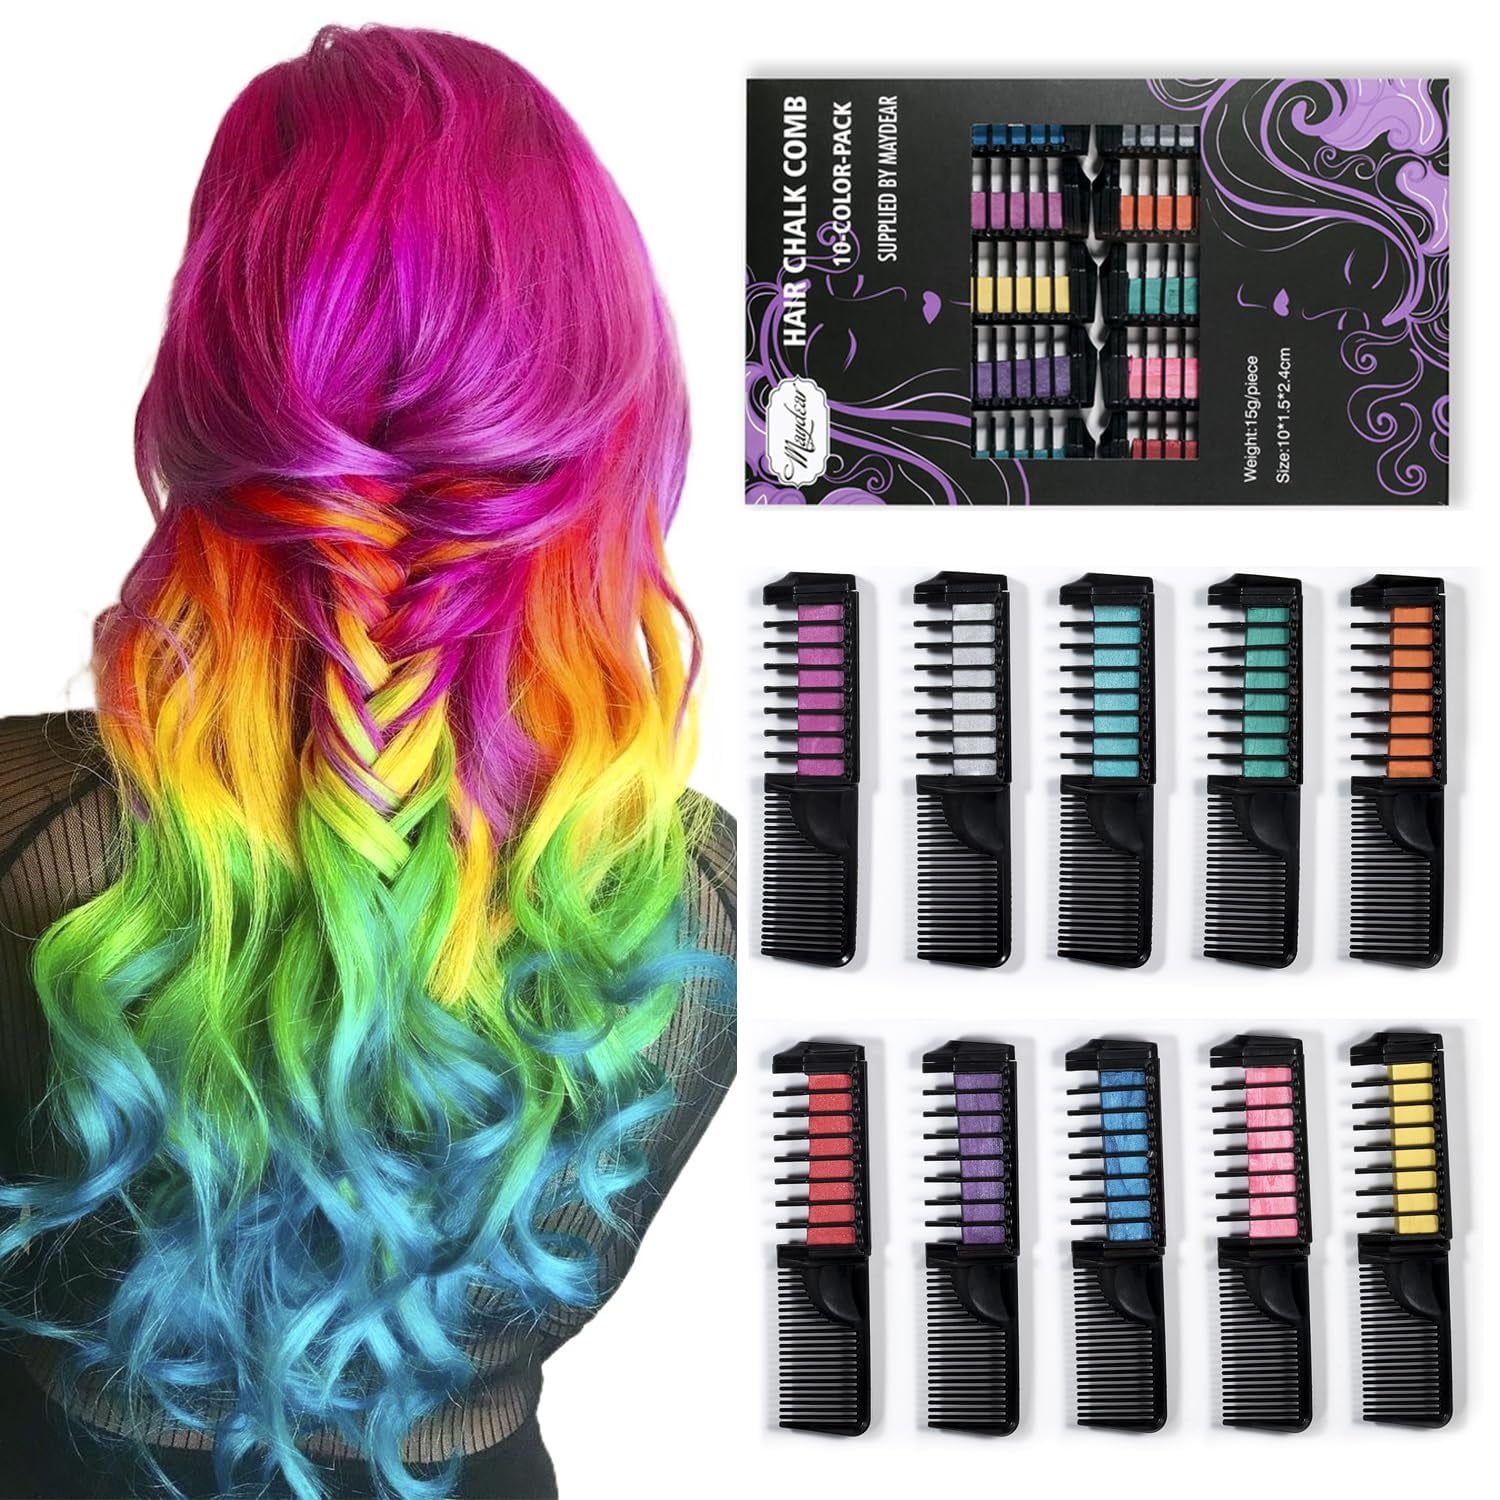 10 Color Hair Chalk for Girls Temporary Hair Color Dye for Kids,Washable  Hair Chalk Comb,Gifts for Girls Age 8-12,Best Creative Gifts for Children's  Day Christmas Halloween Cosplay Birthday Party New Year 